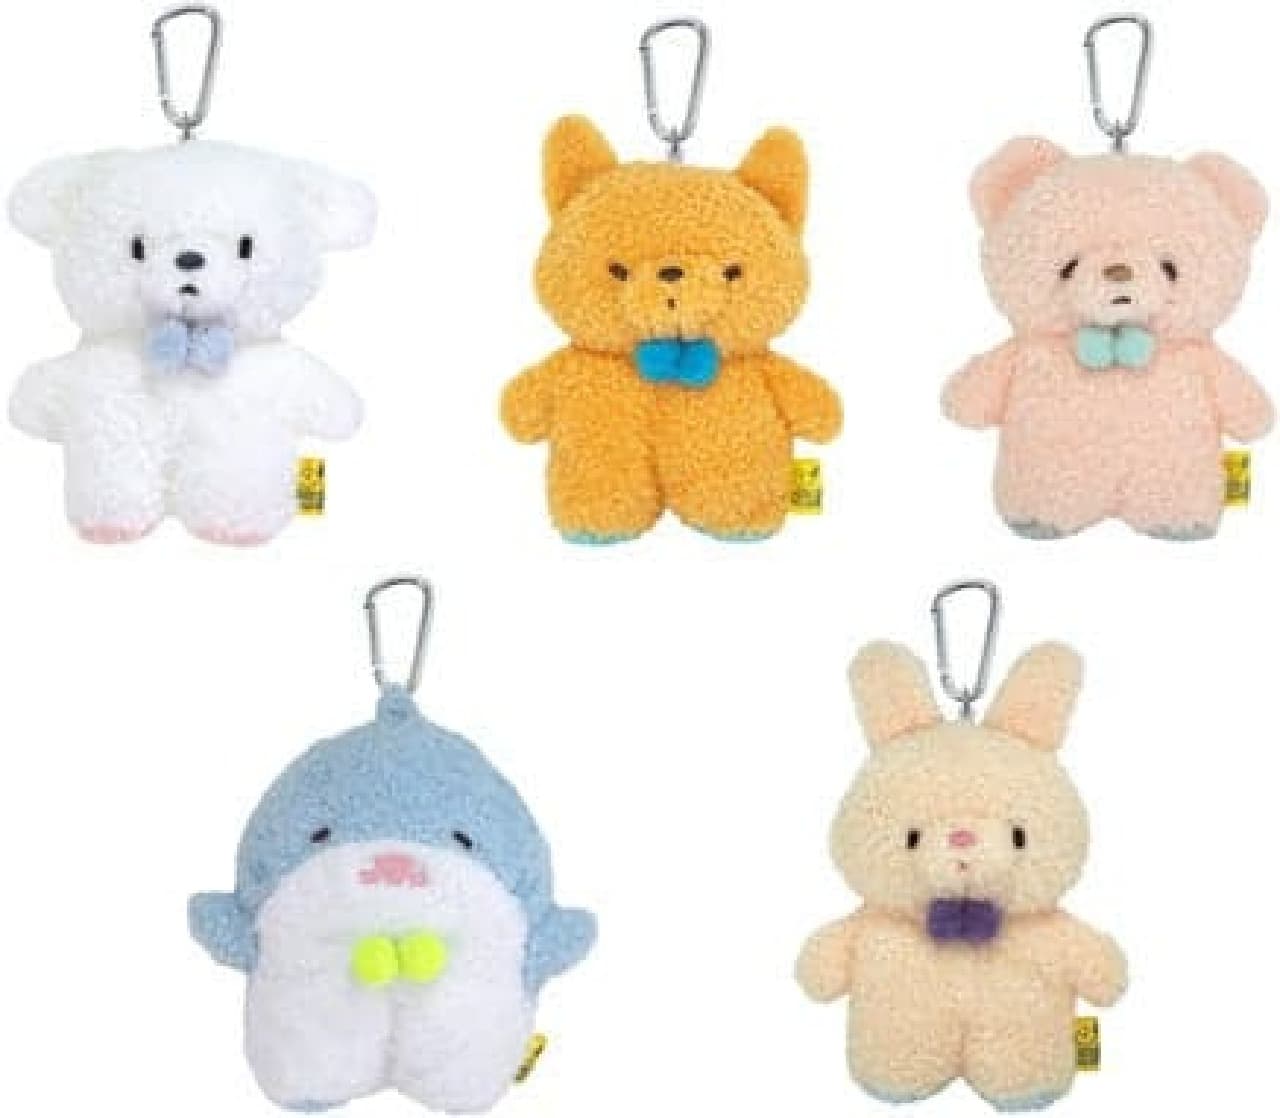 Sun Lemon's popular "Tatton" series of new goods, "Pass Pouch for Going Out Together" and "Nikkori Pouch" will go on sale on April 10, 2012 Image 2